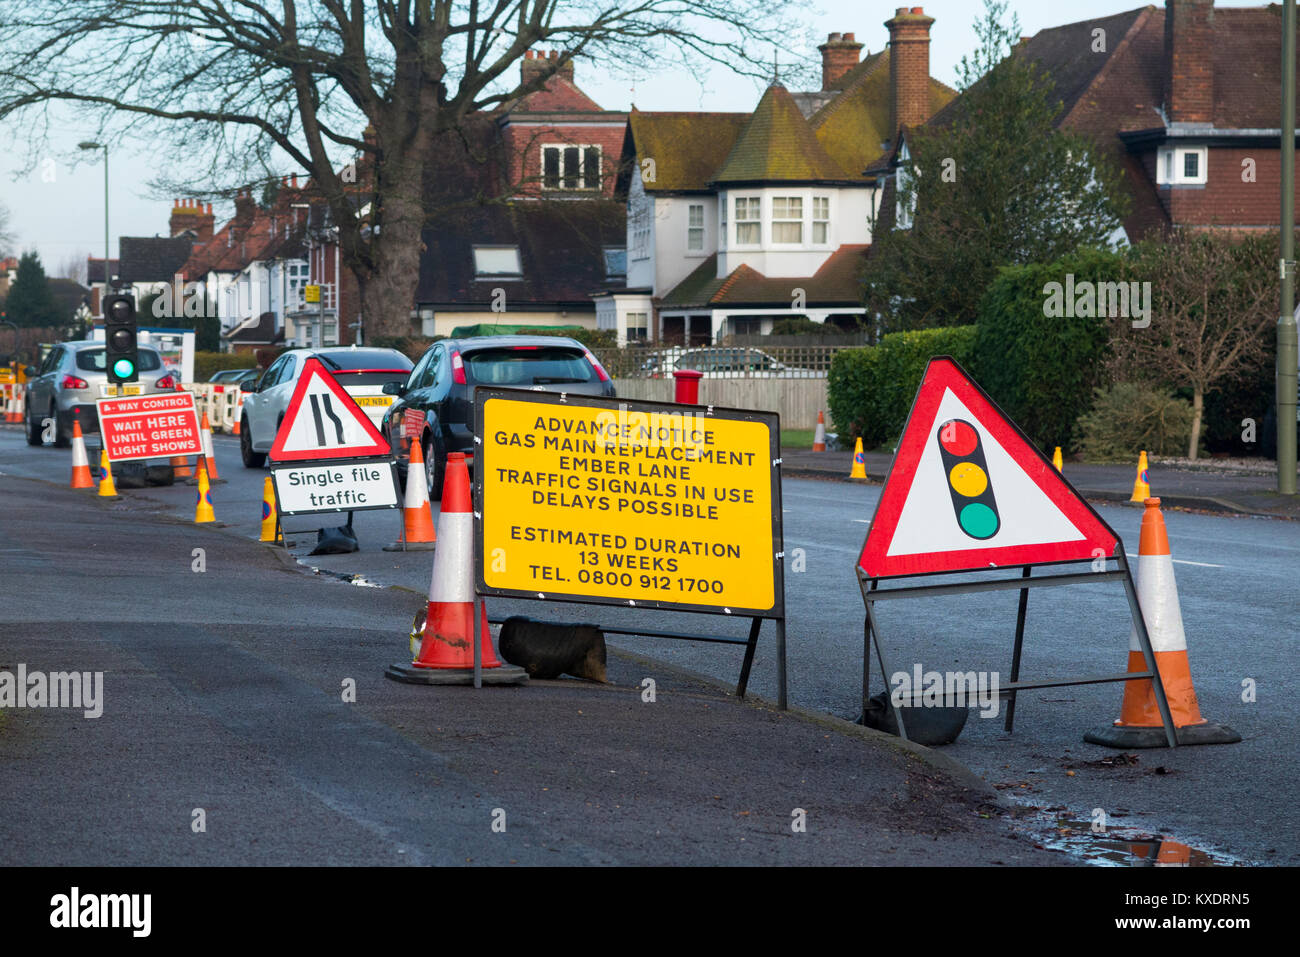 Temporary roadworks with traffic light signals and cones / sign / signs / traffic light. UK. (93) Stock Photo